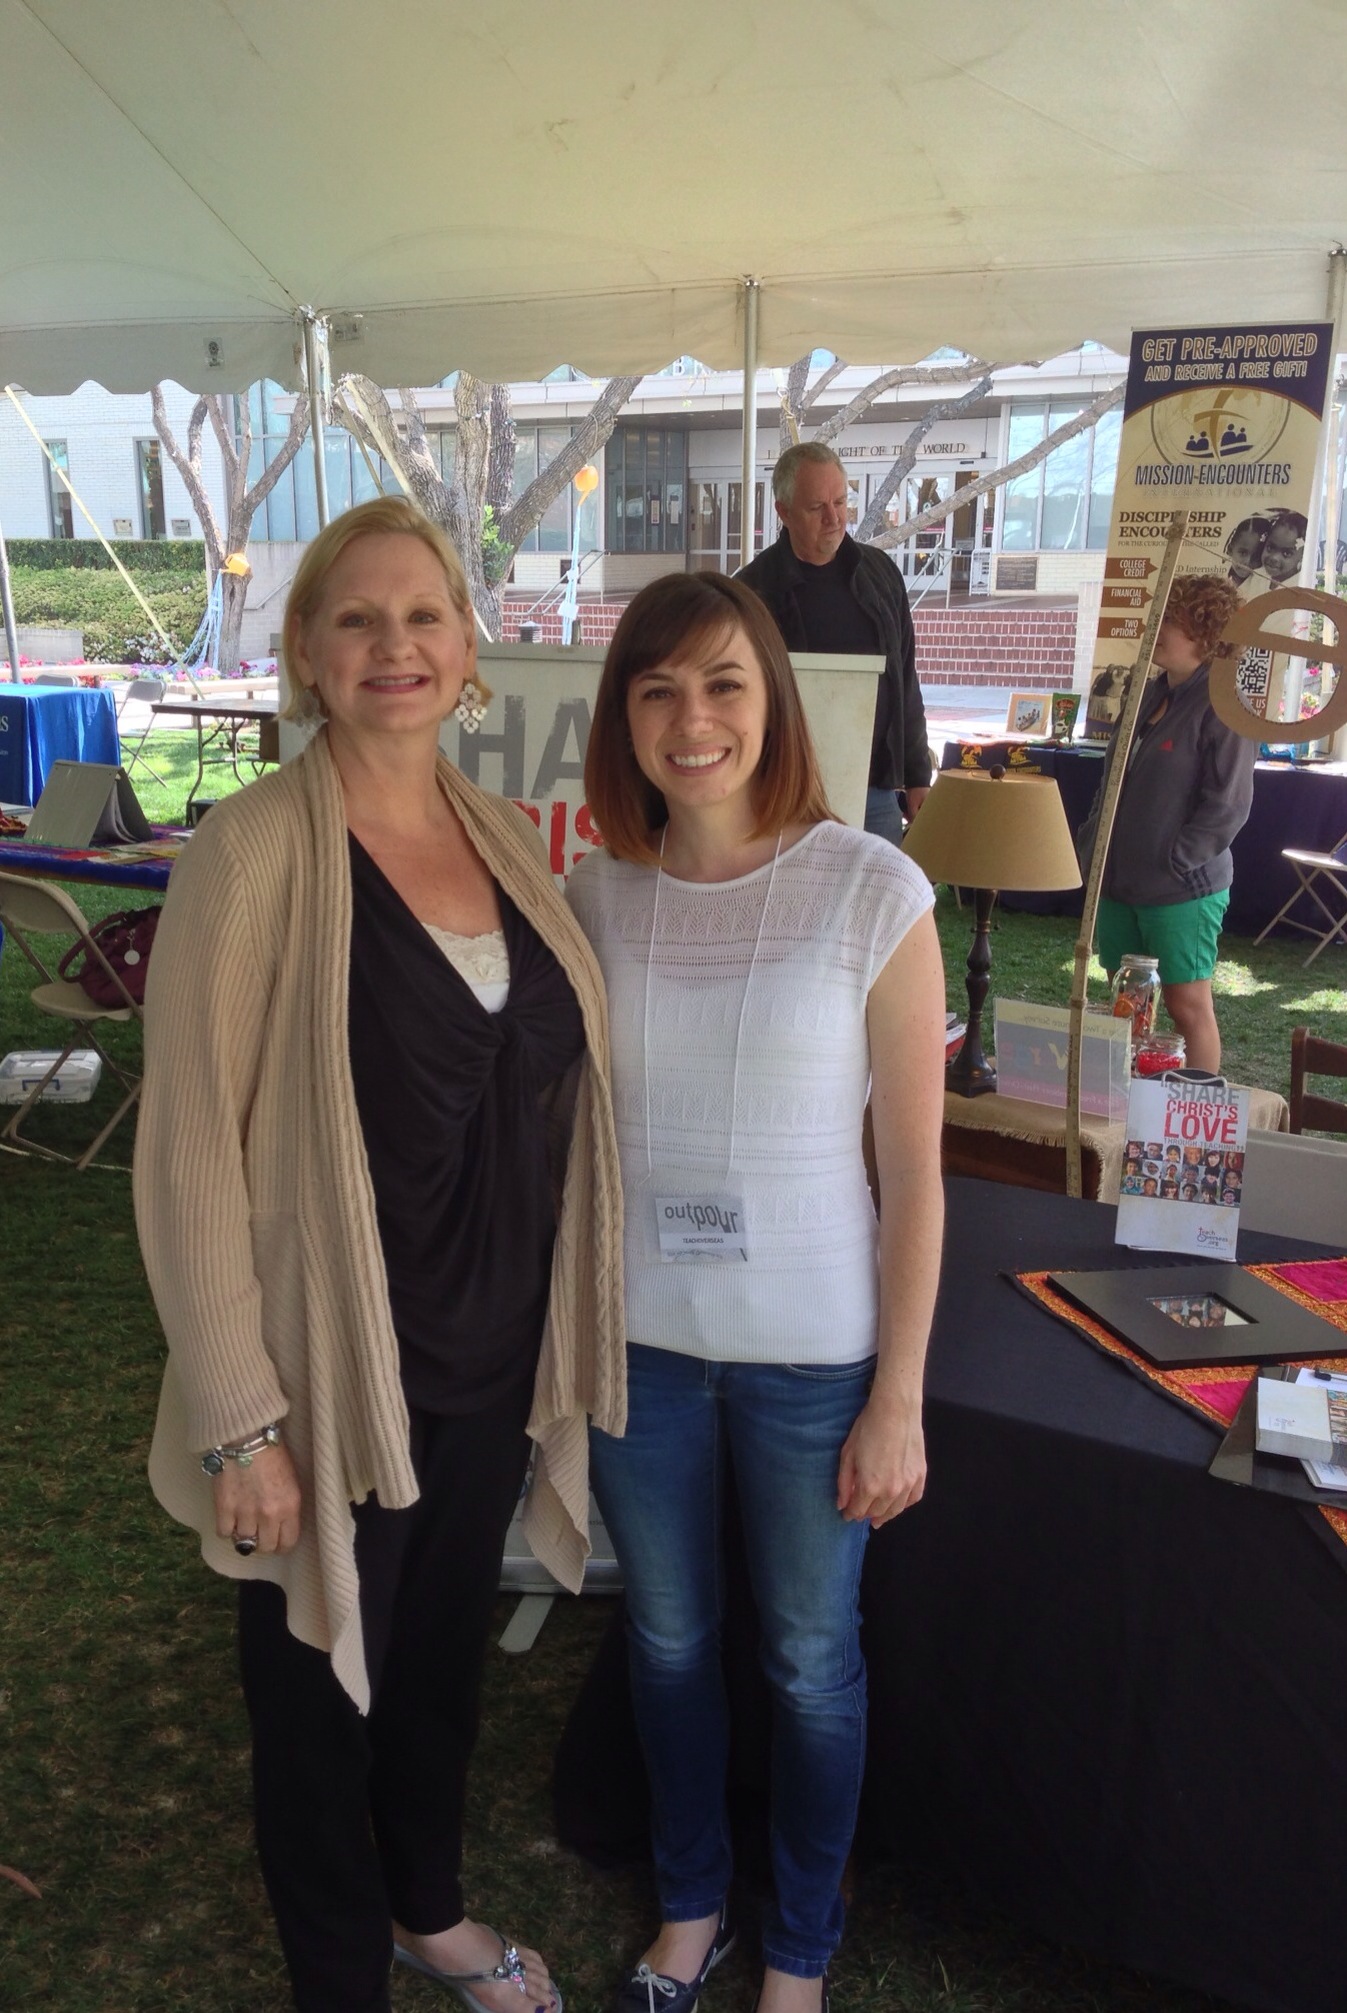 Dawn with a new friend at the missions conference, Biola University